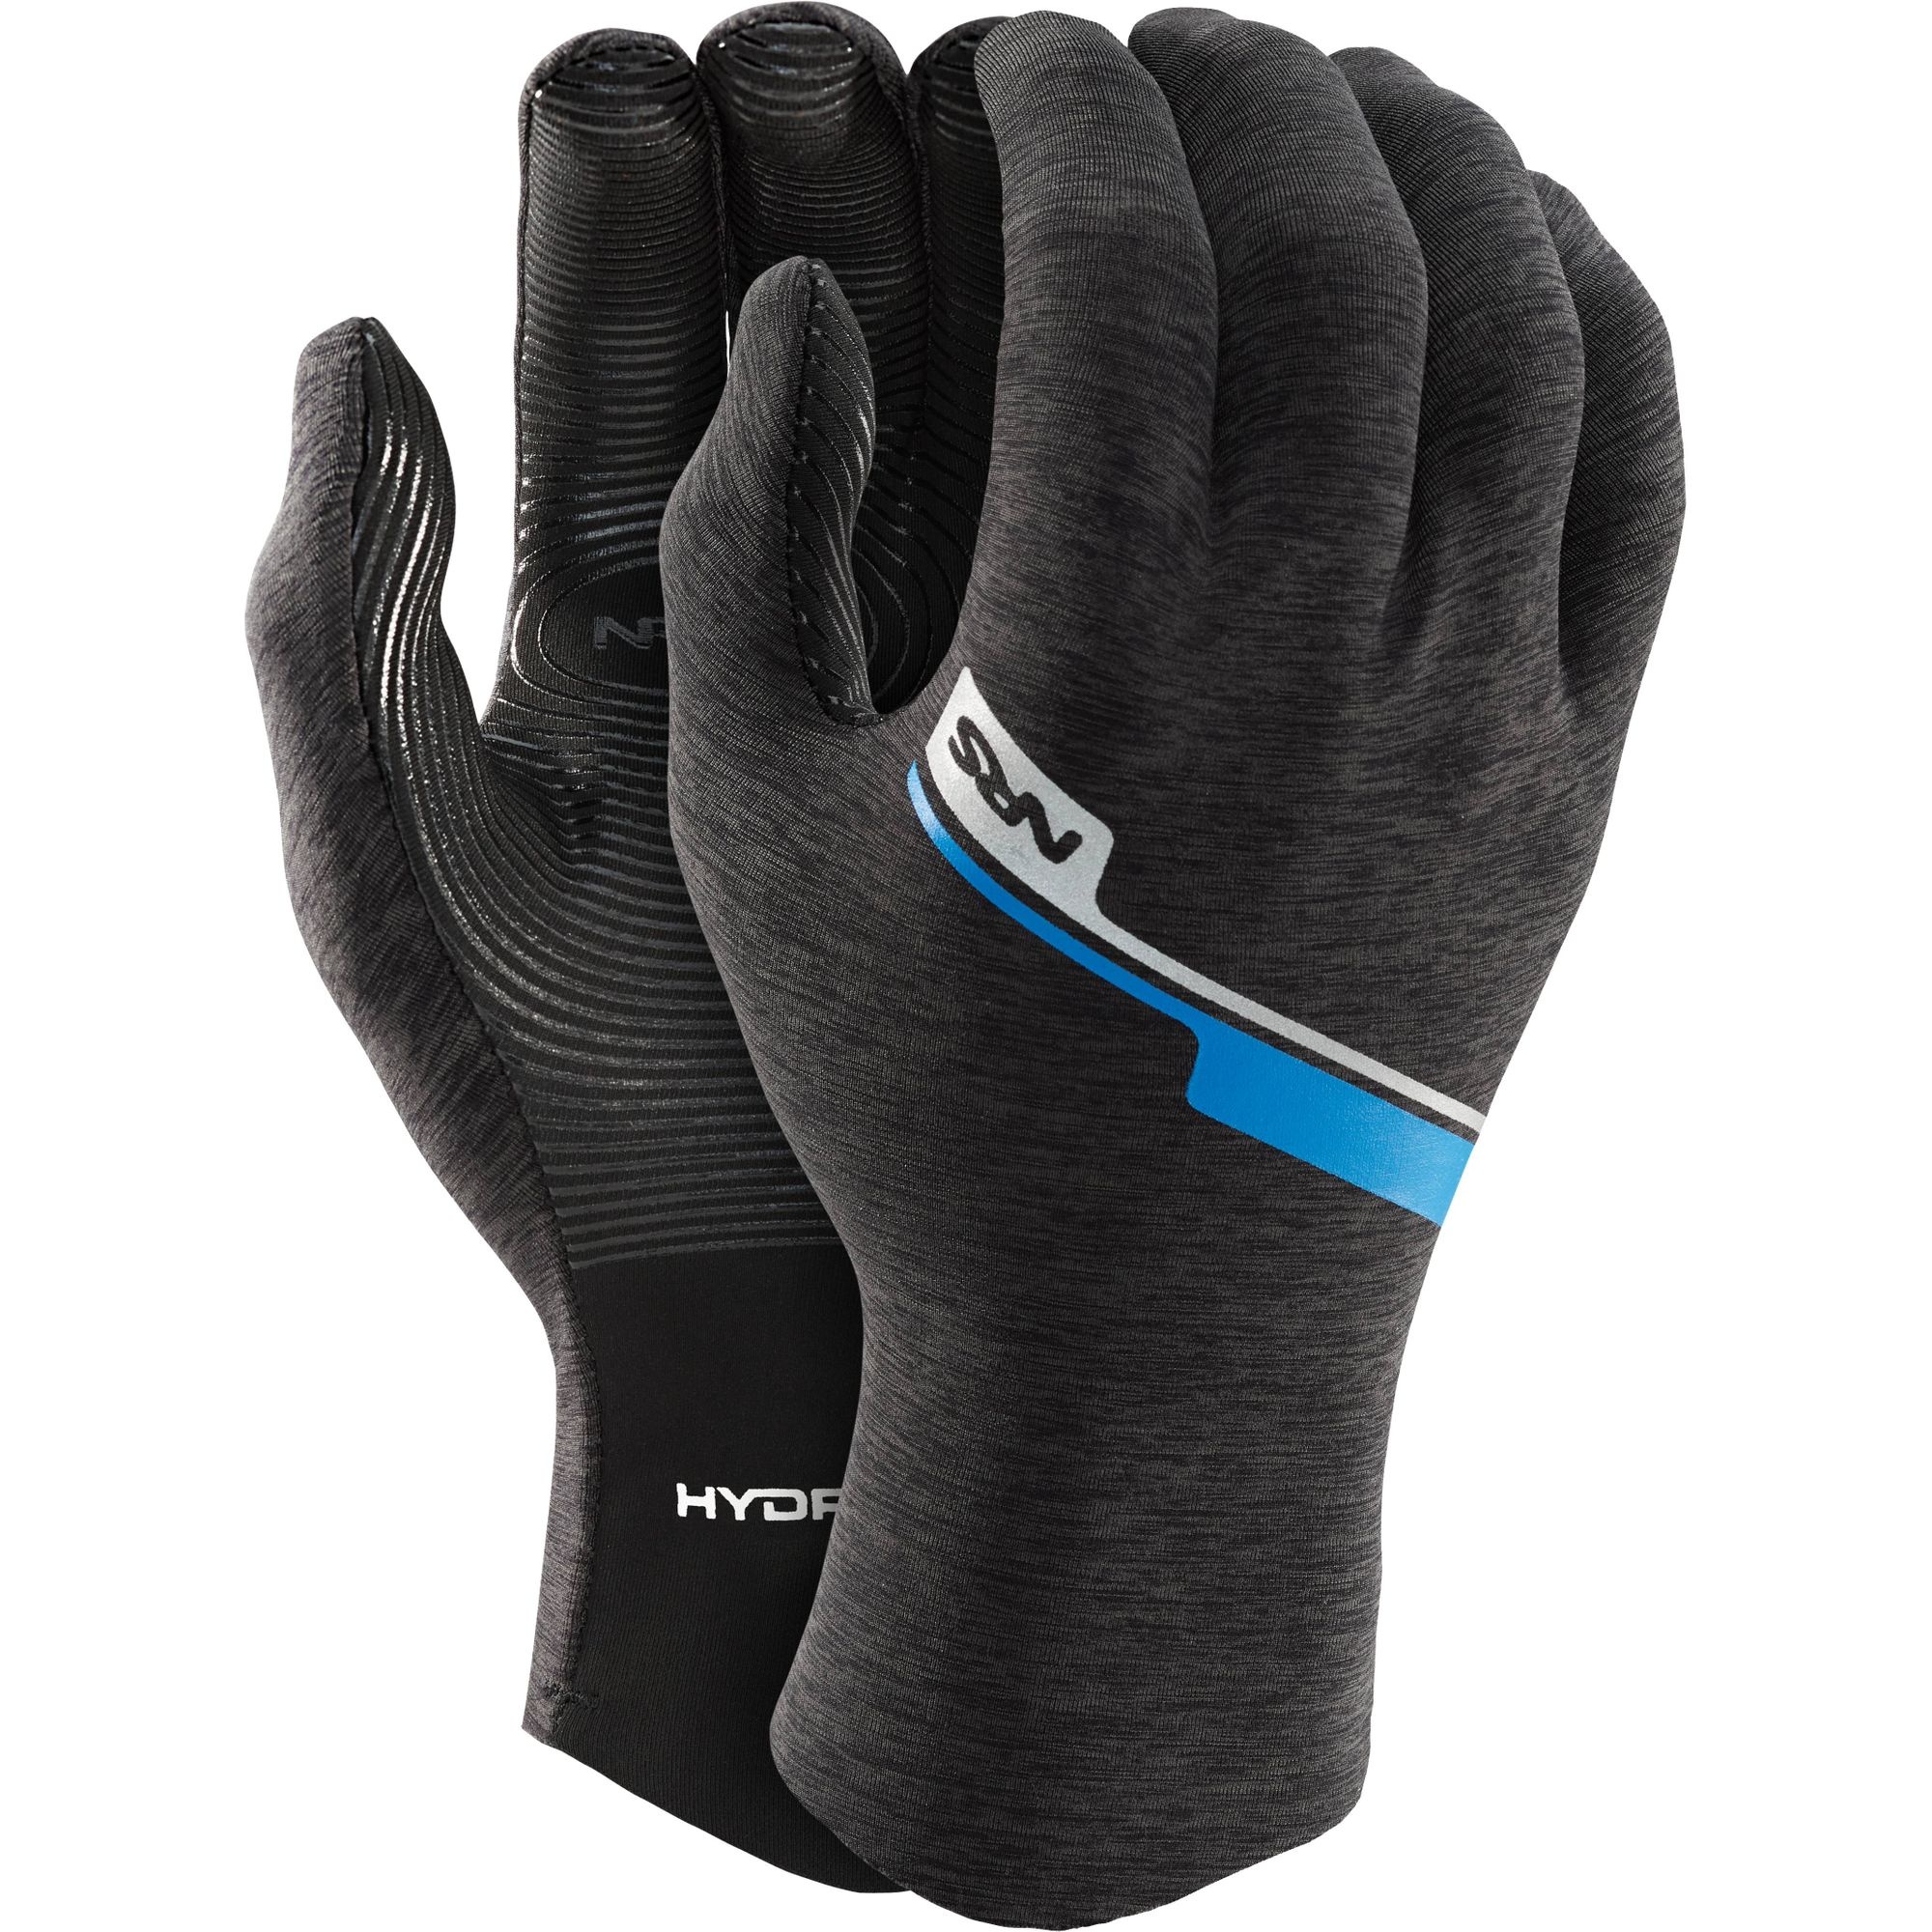 NRS NRS HydroSkin Gloves